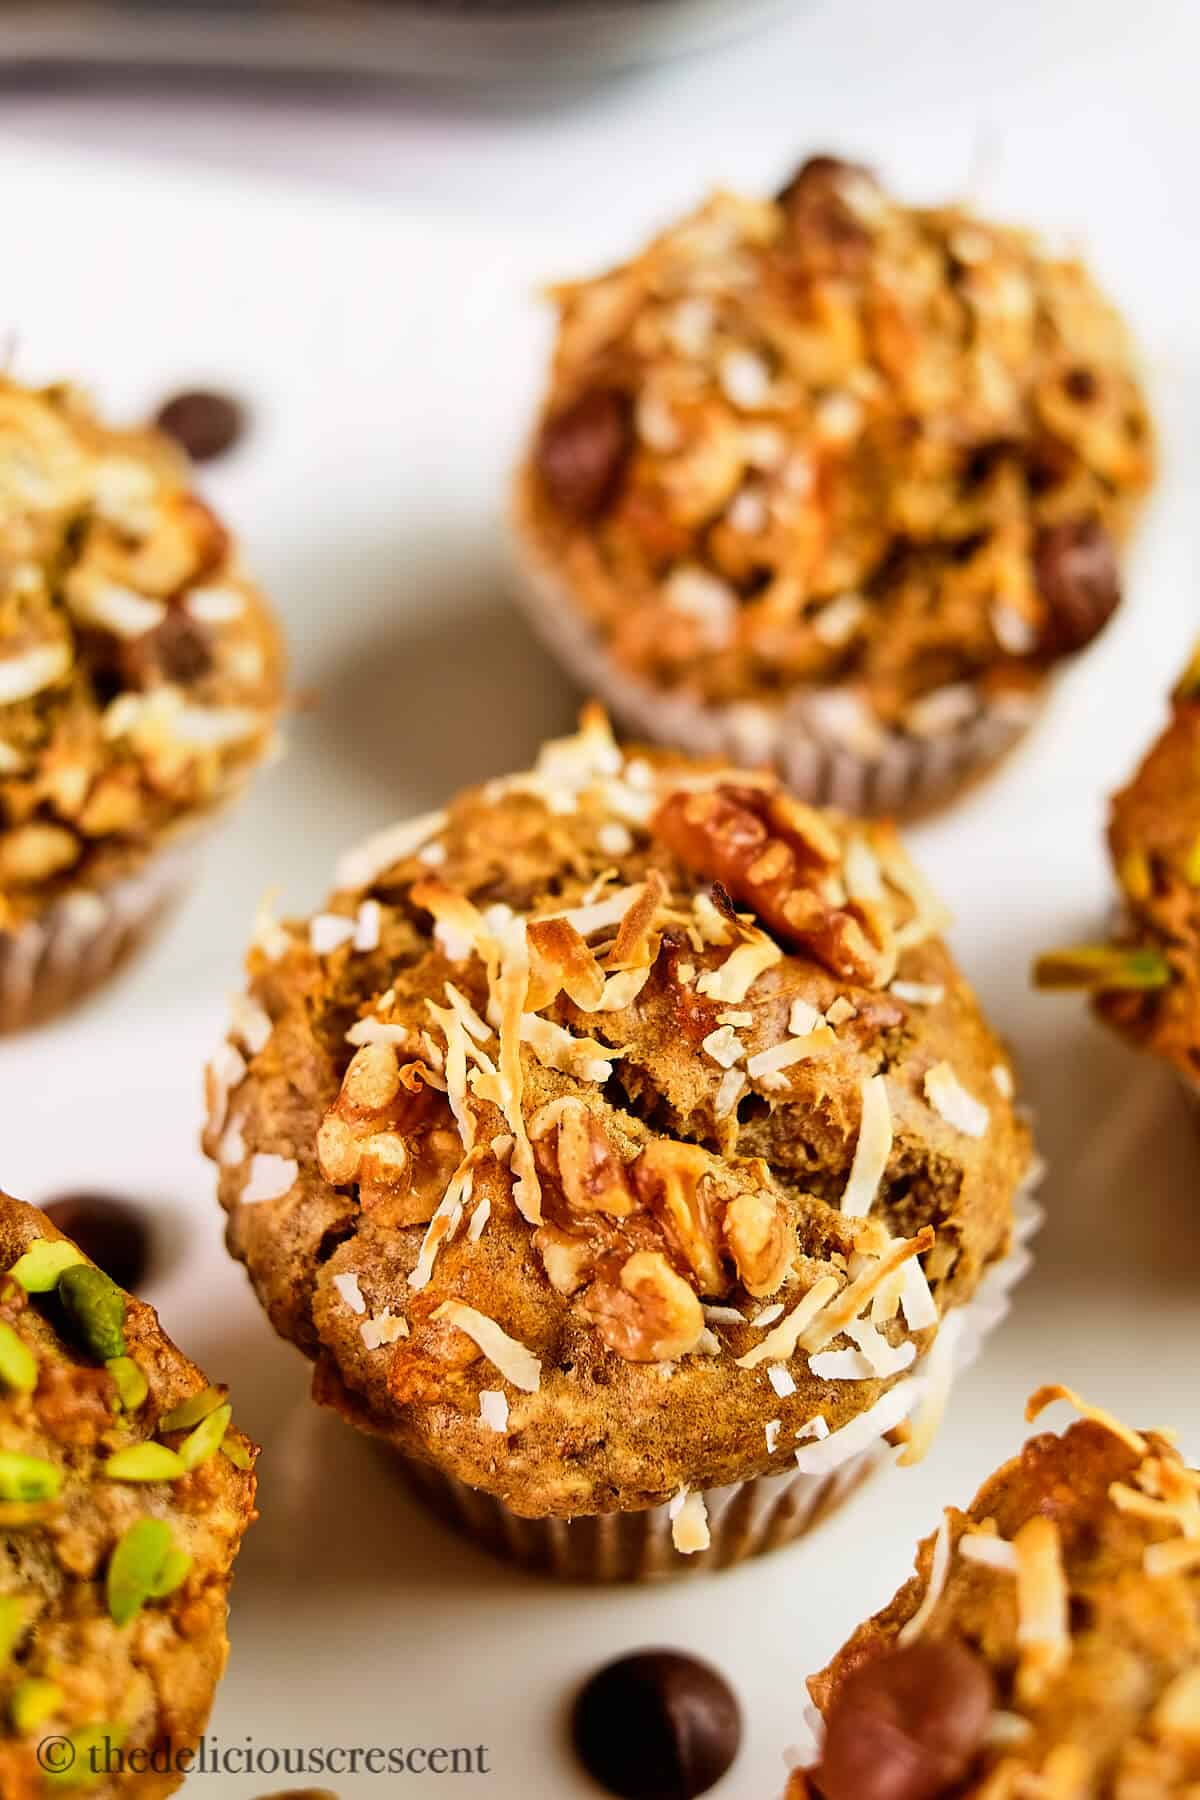 Date sweetened muffins in a plate.